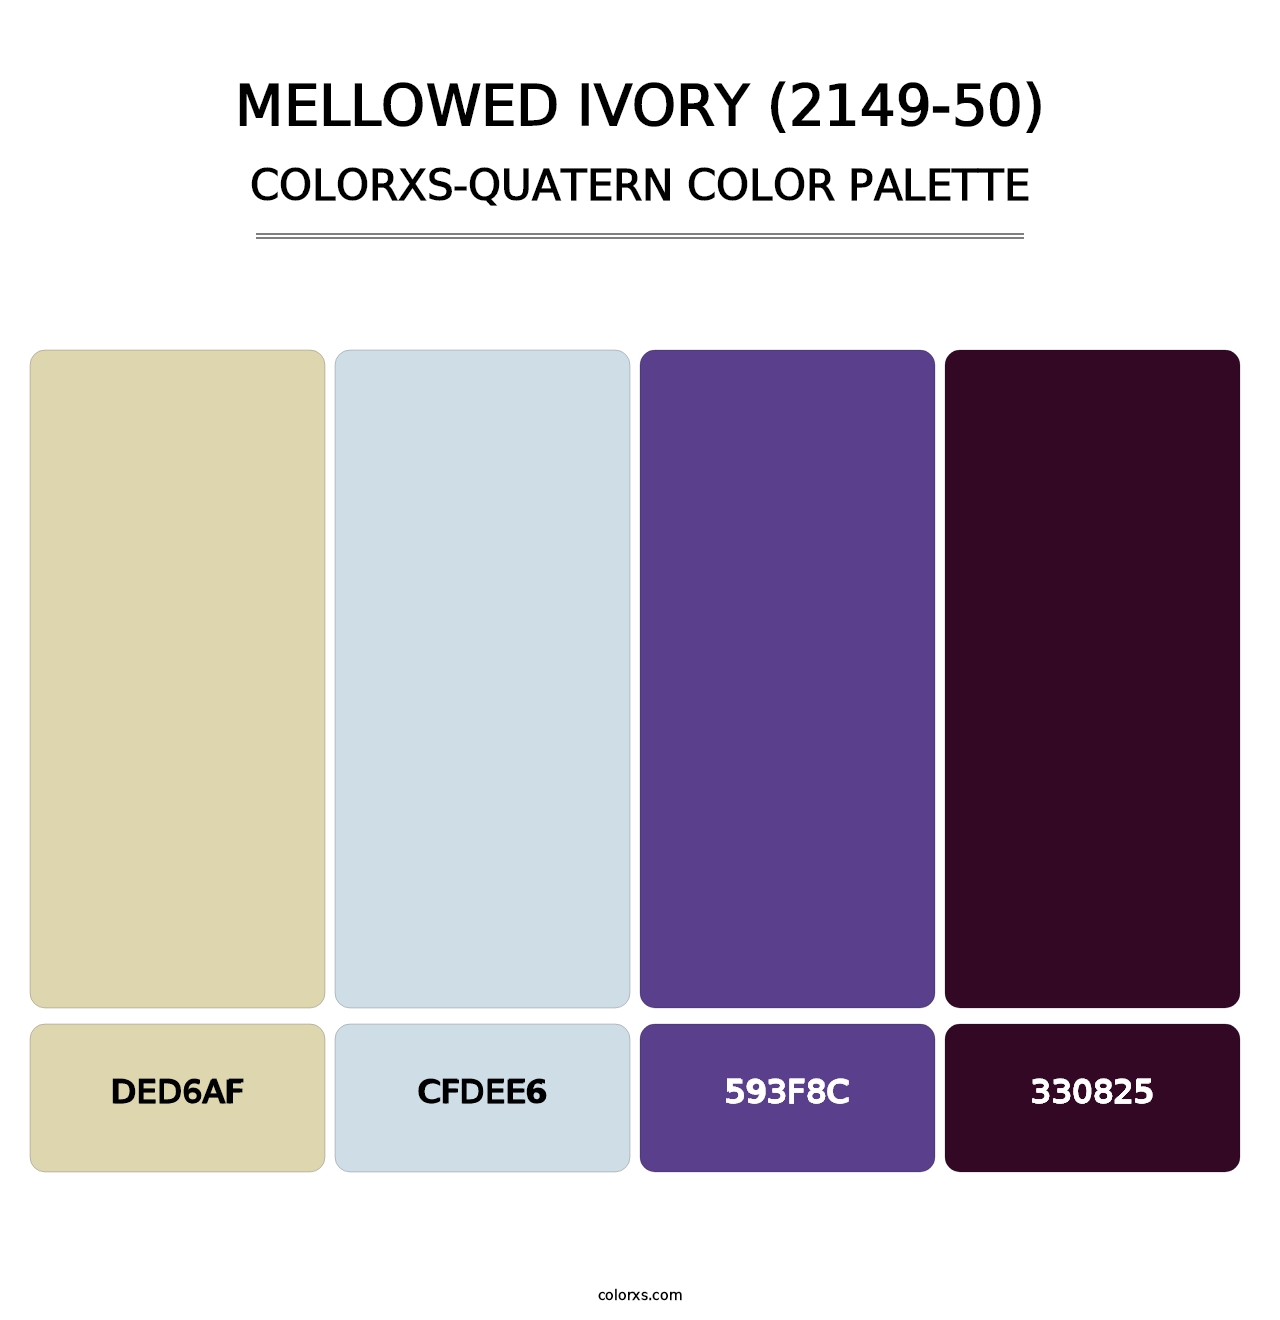 Mellowed Ivory (2149-50) - Colorxs Quatern Palette